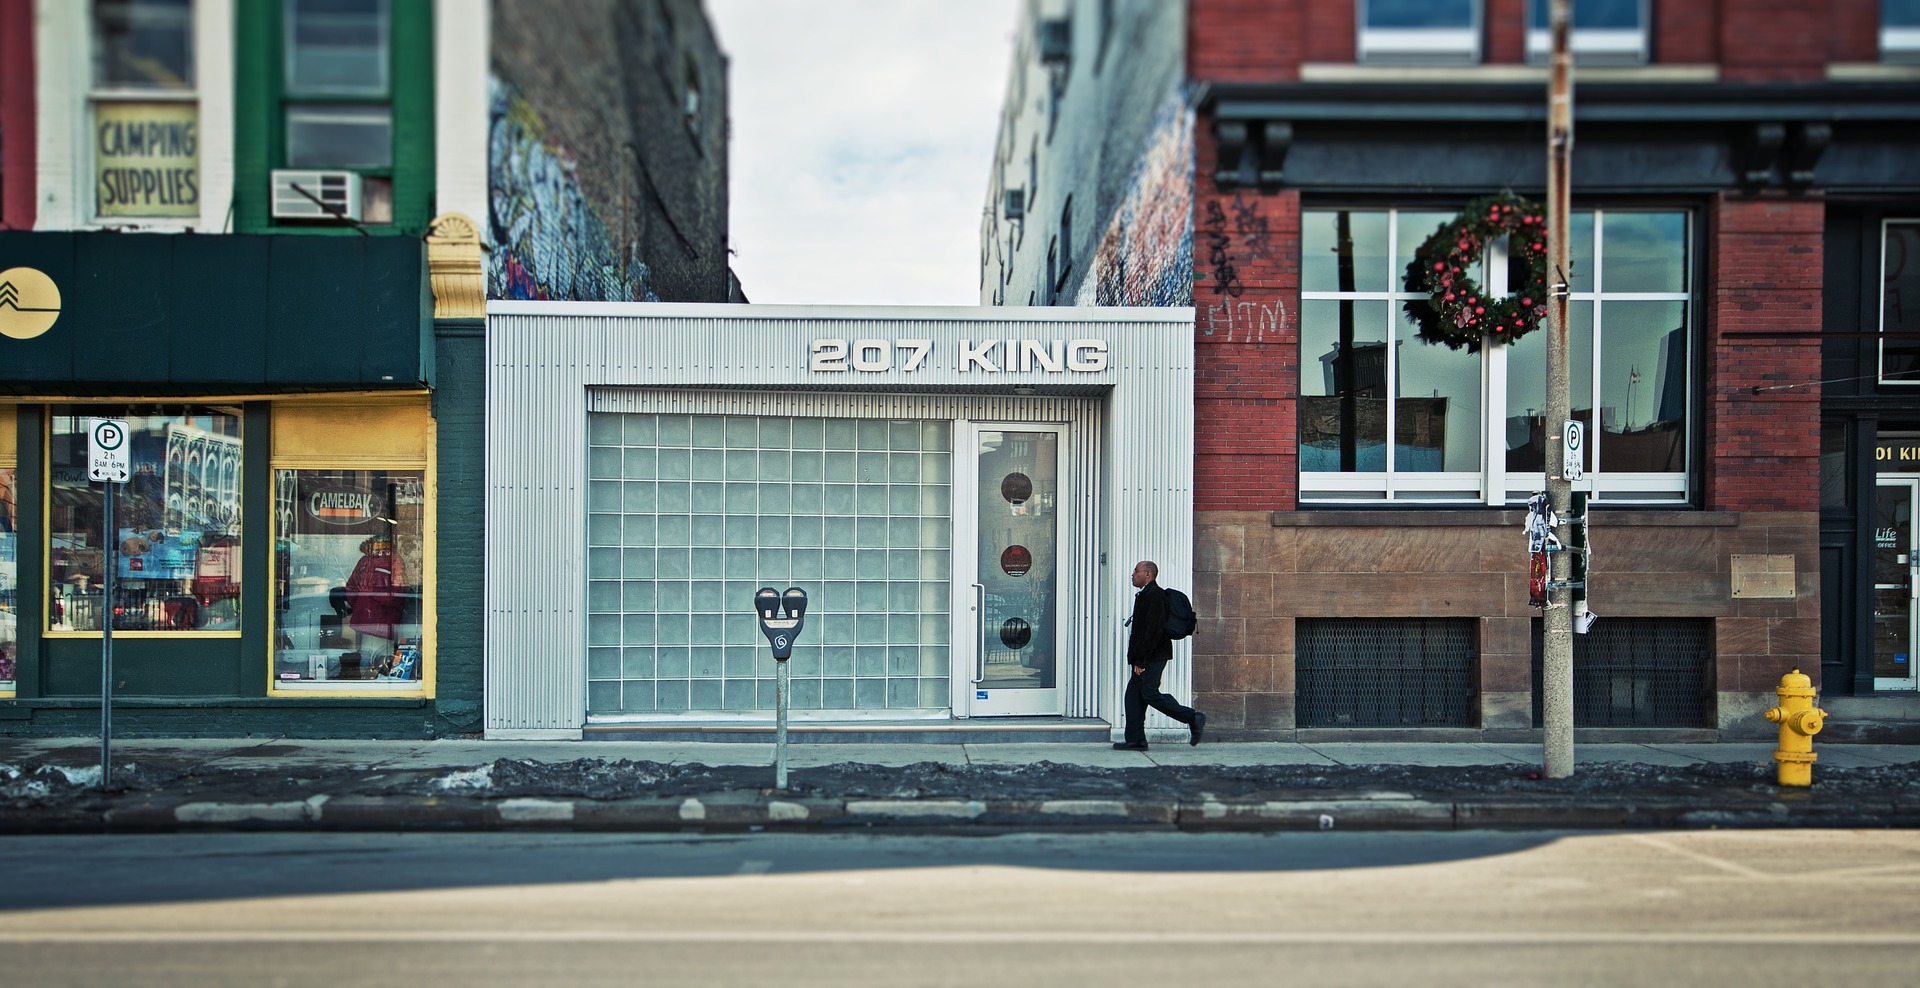 glass storefront